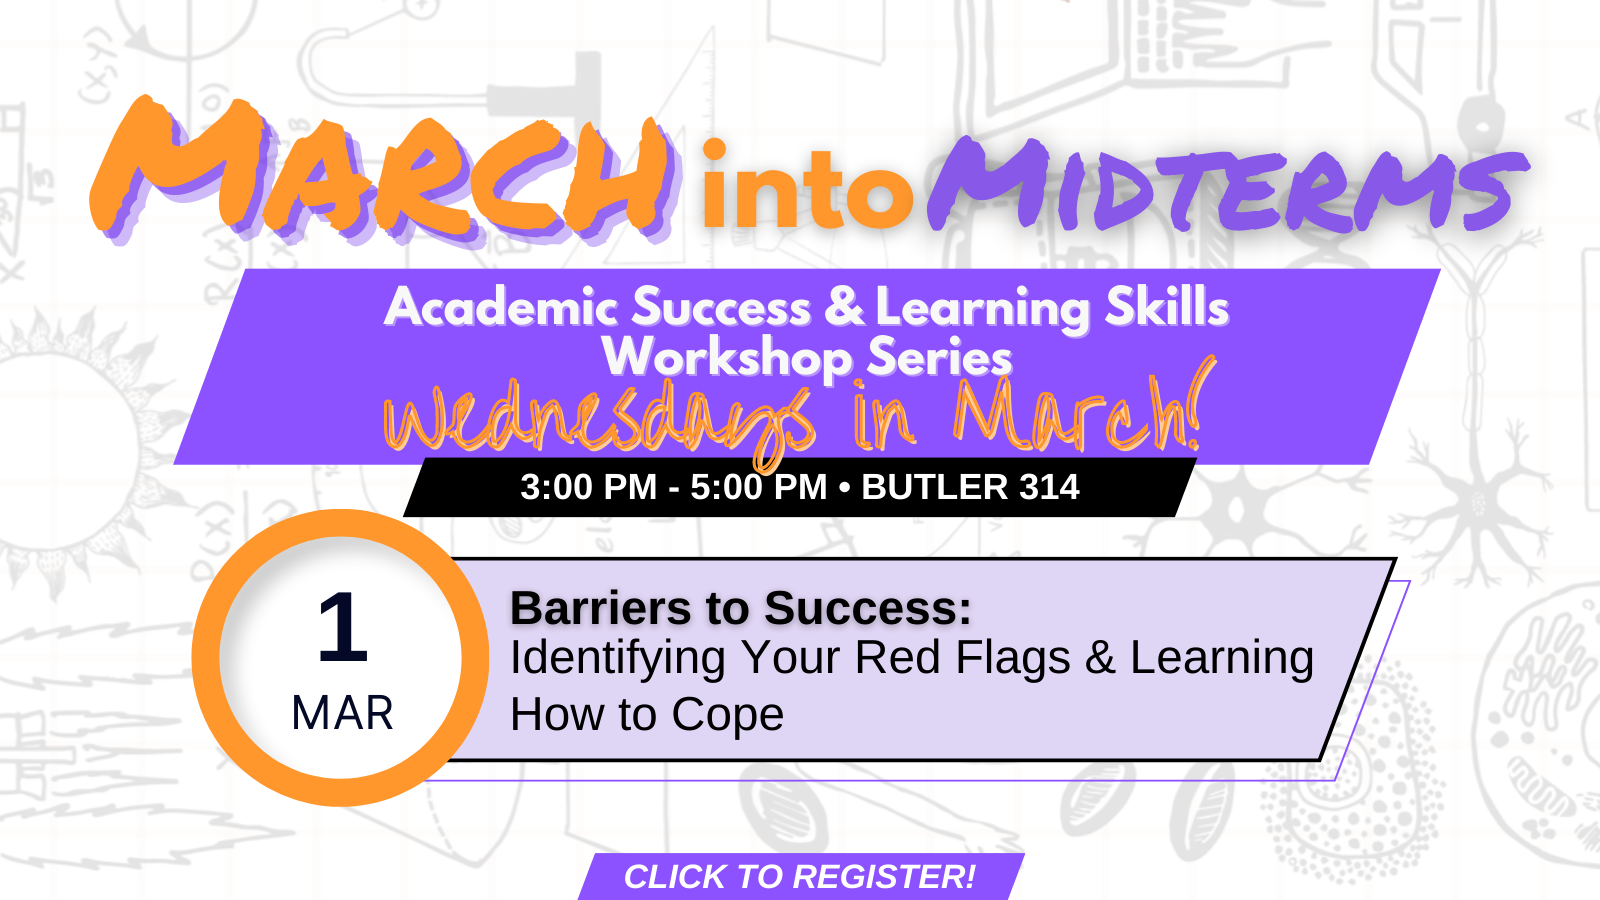 Flyer for March into Midterms workshop. Barriers to Success: Identifying your red flags and learning how to cope. March 1, 3 to 5pm in Butler 314. Workshops are every Wednesday in March. Click image to register.